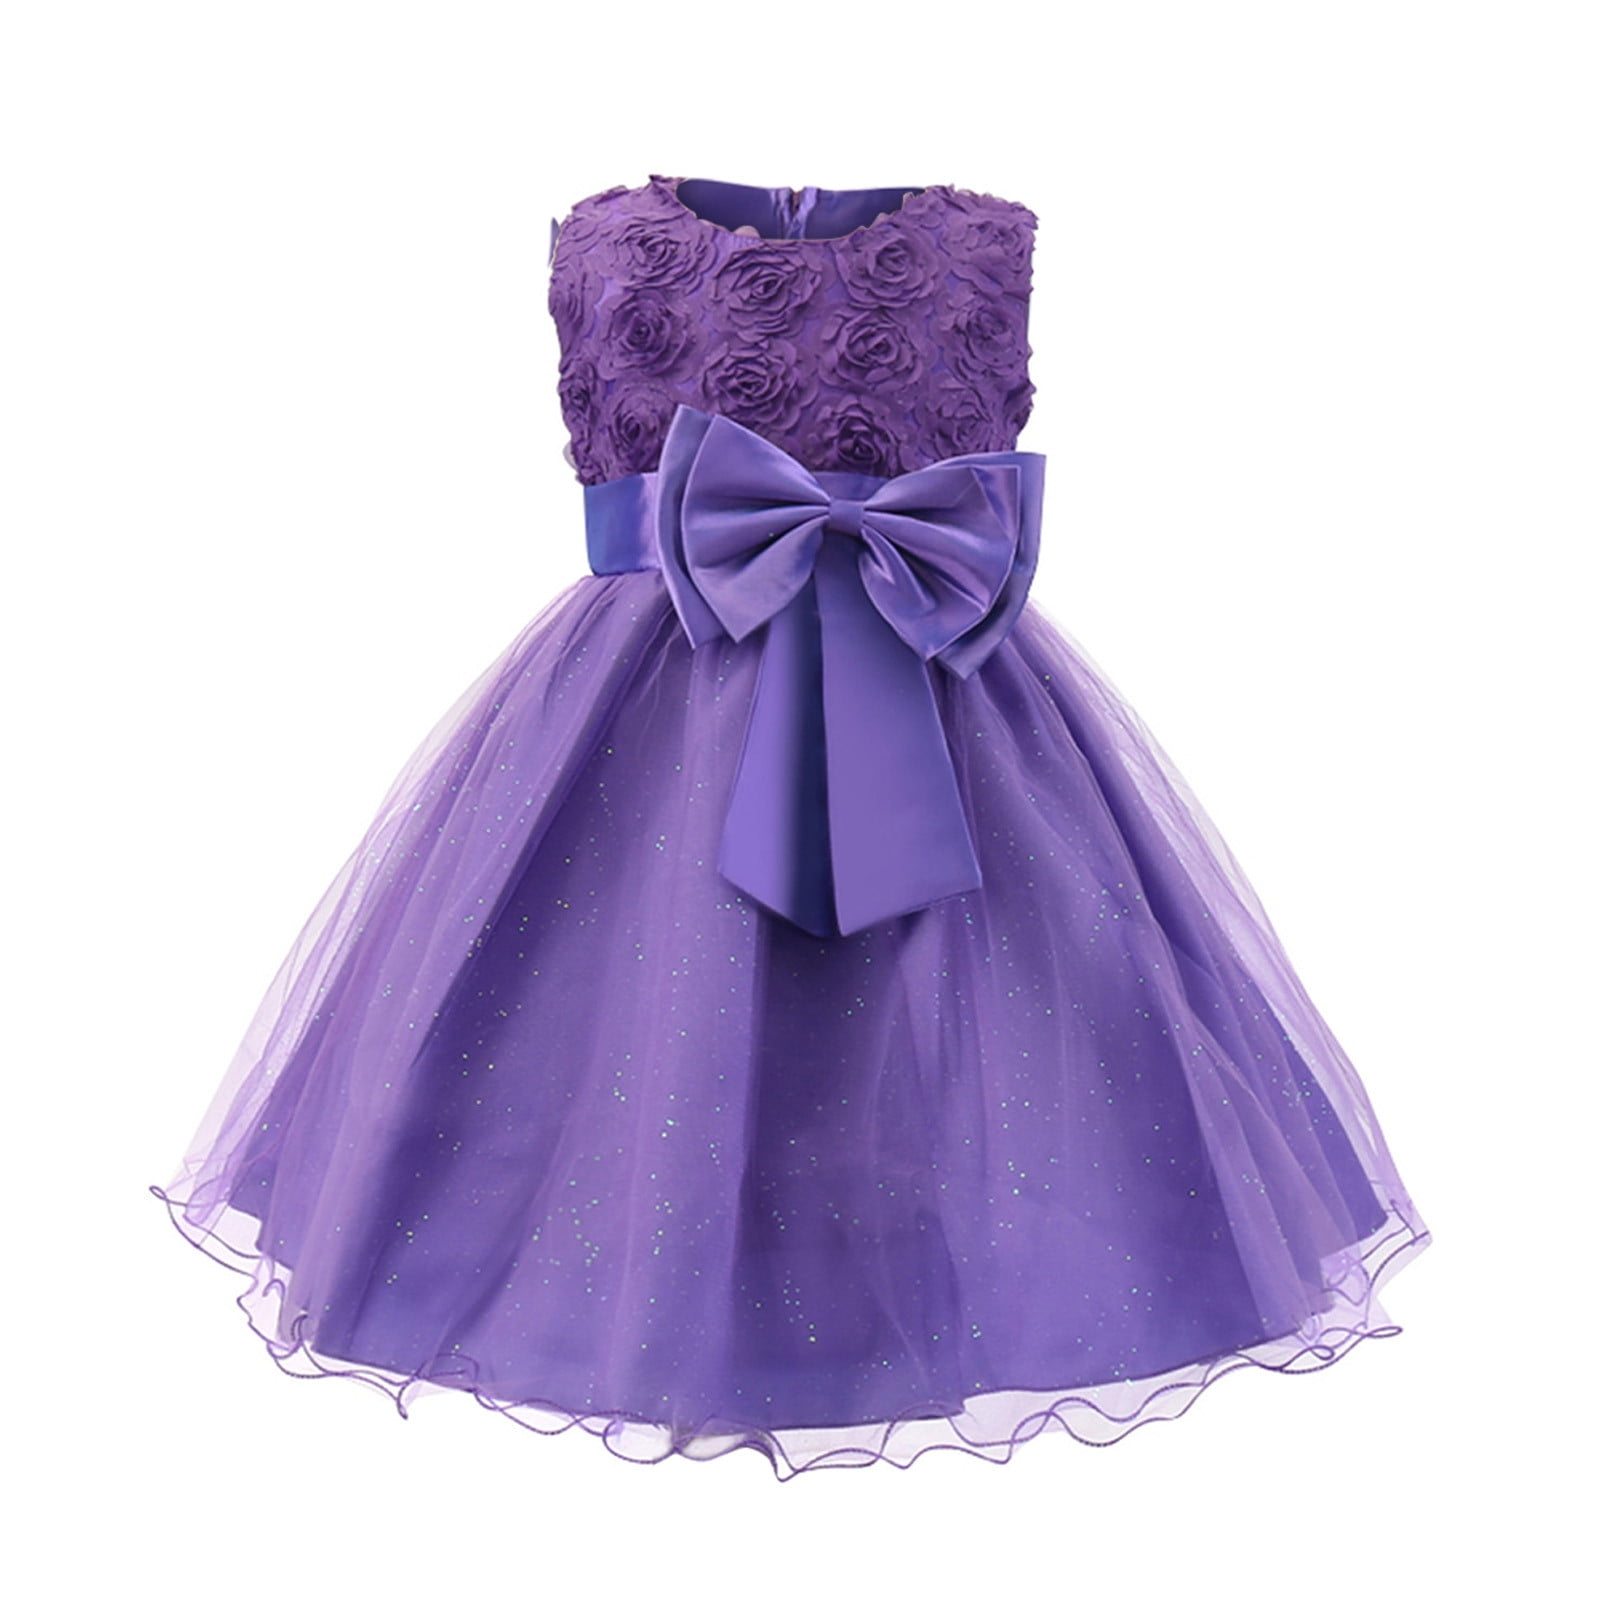 Girls Dresses And Special Occasion Outfits - Papilio Kids